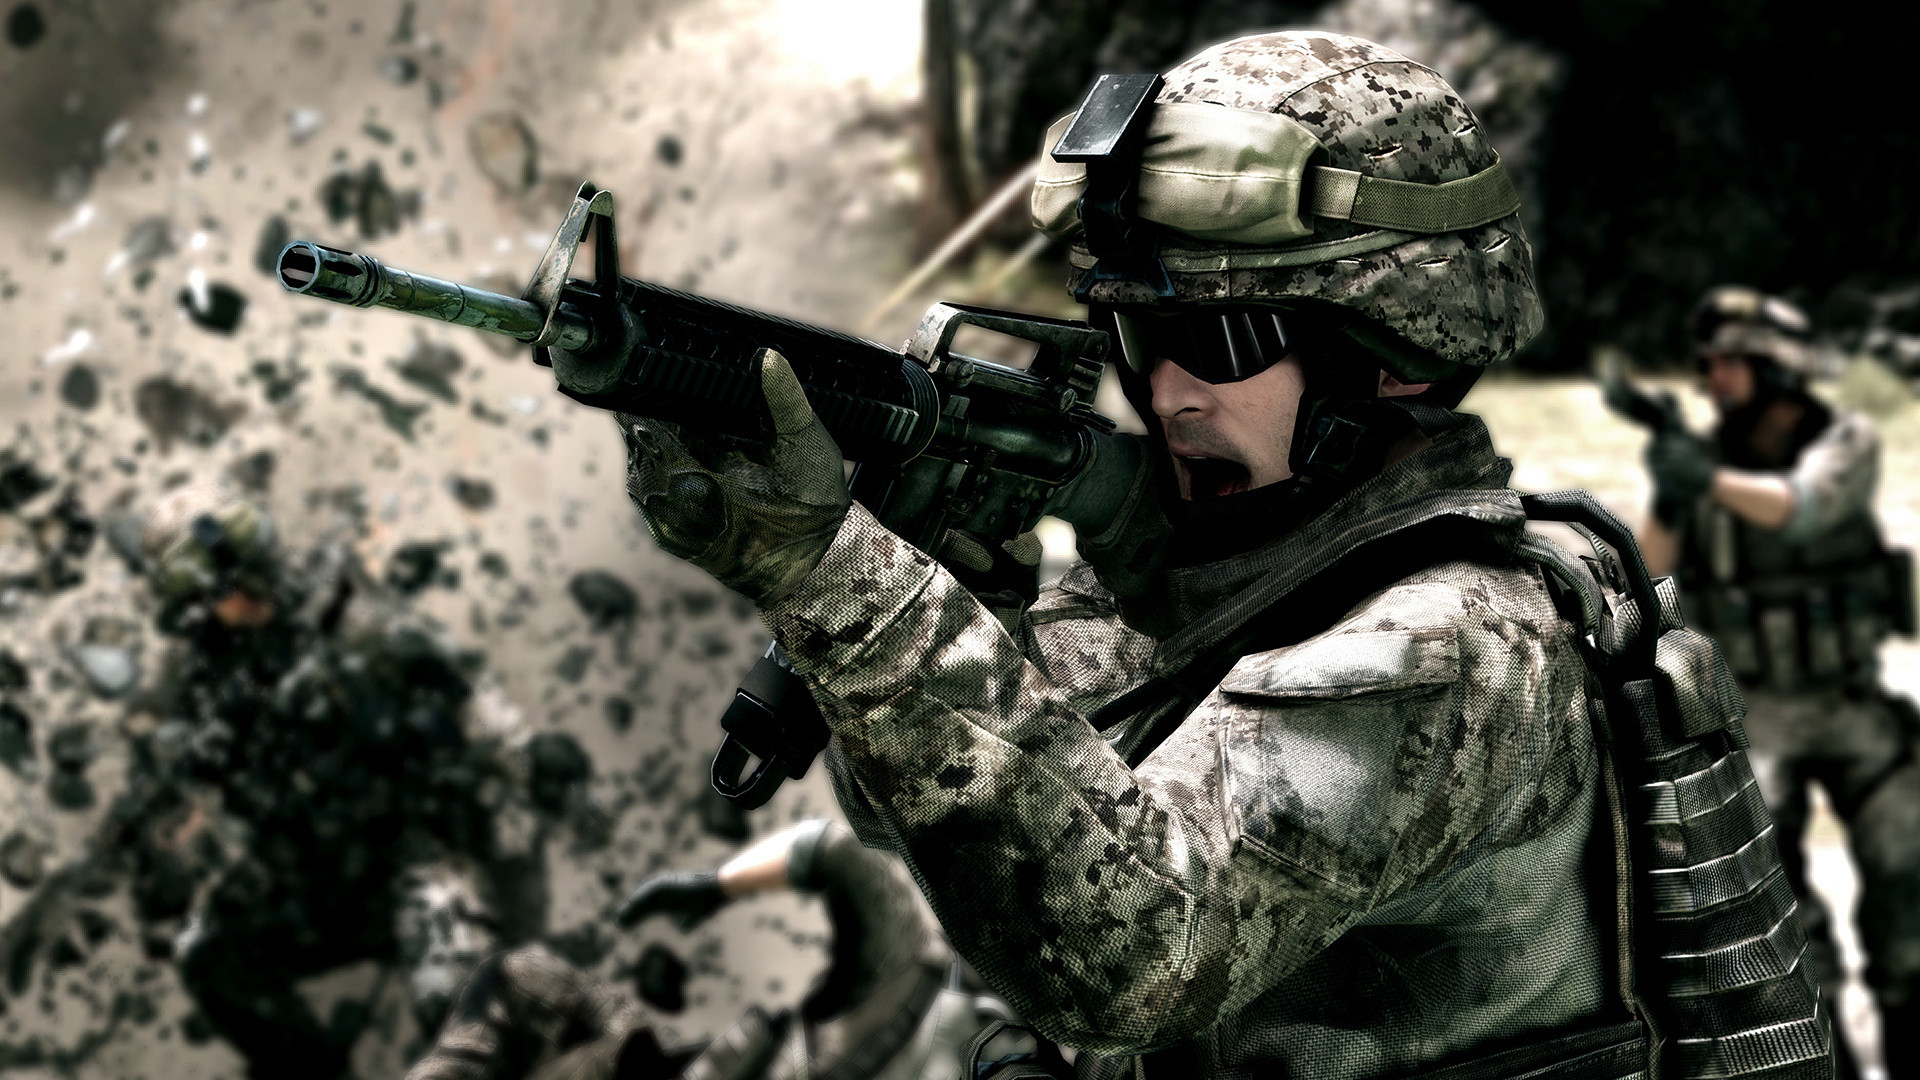 1920x1080 Army Soldier Wallpaper